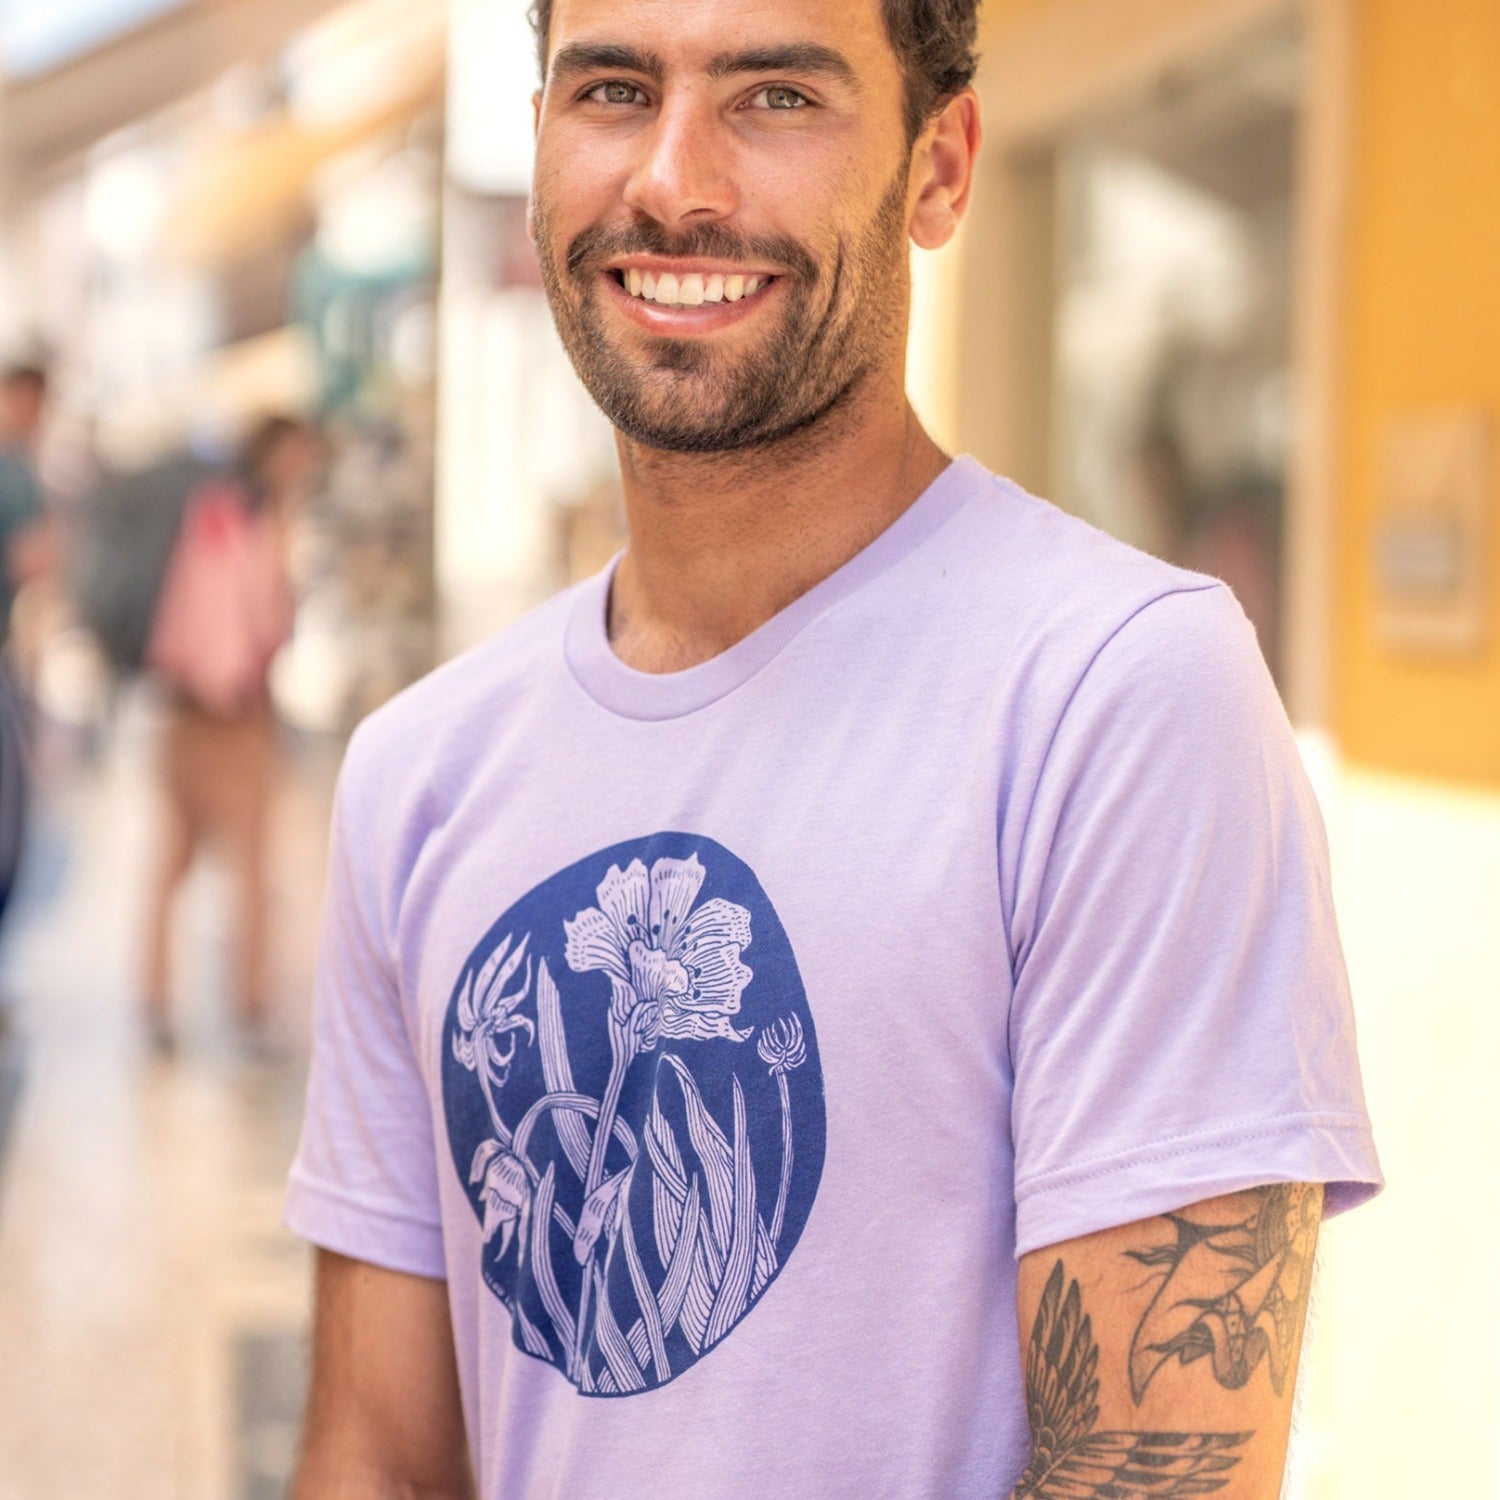 Man smiling wearing a light purple shirt with dark purple flower print on it. People in background out of focus.